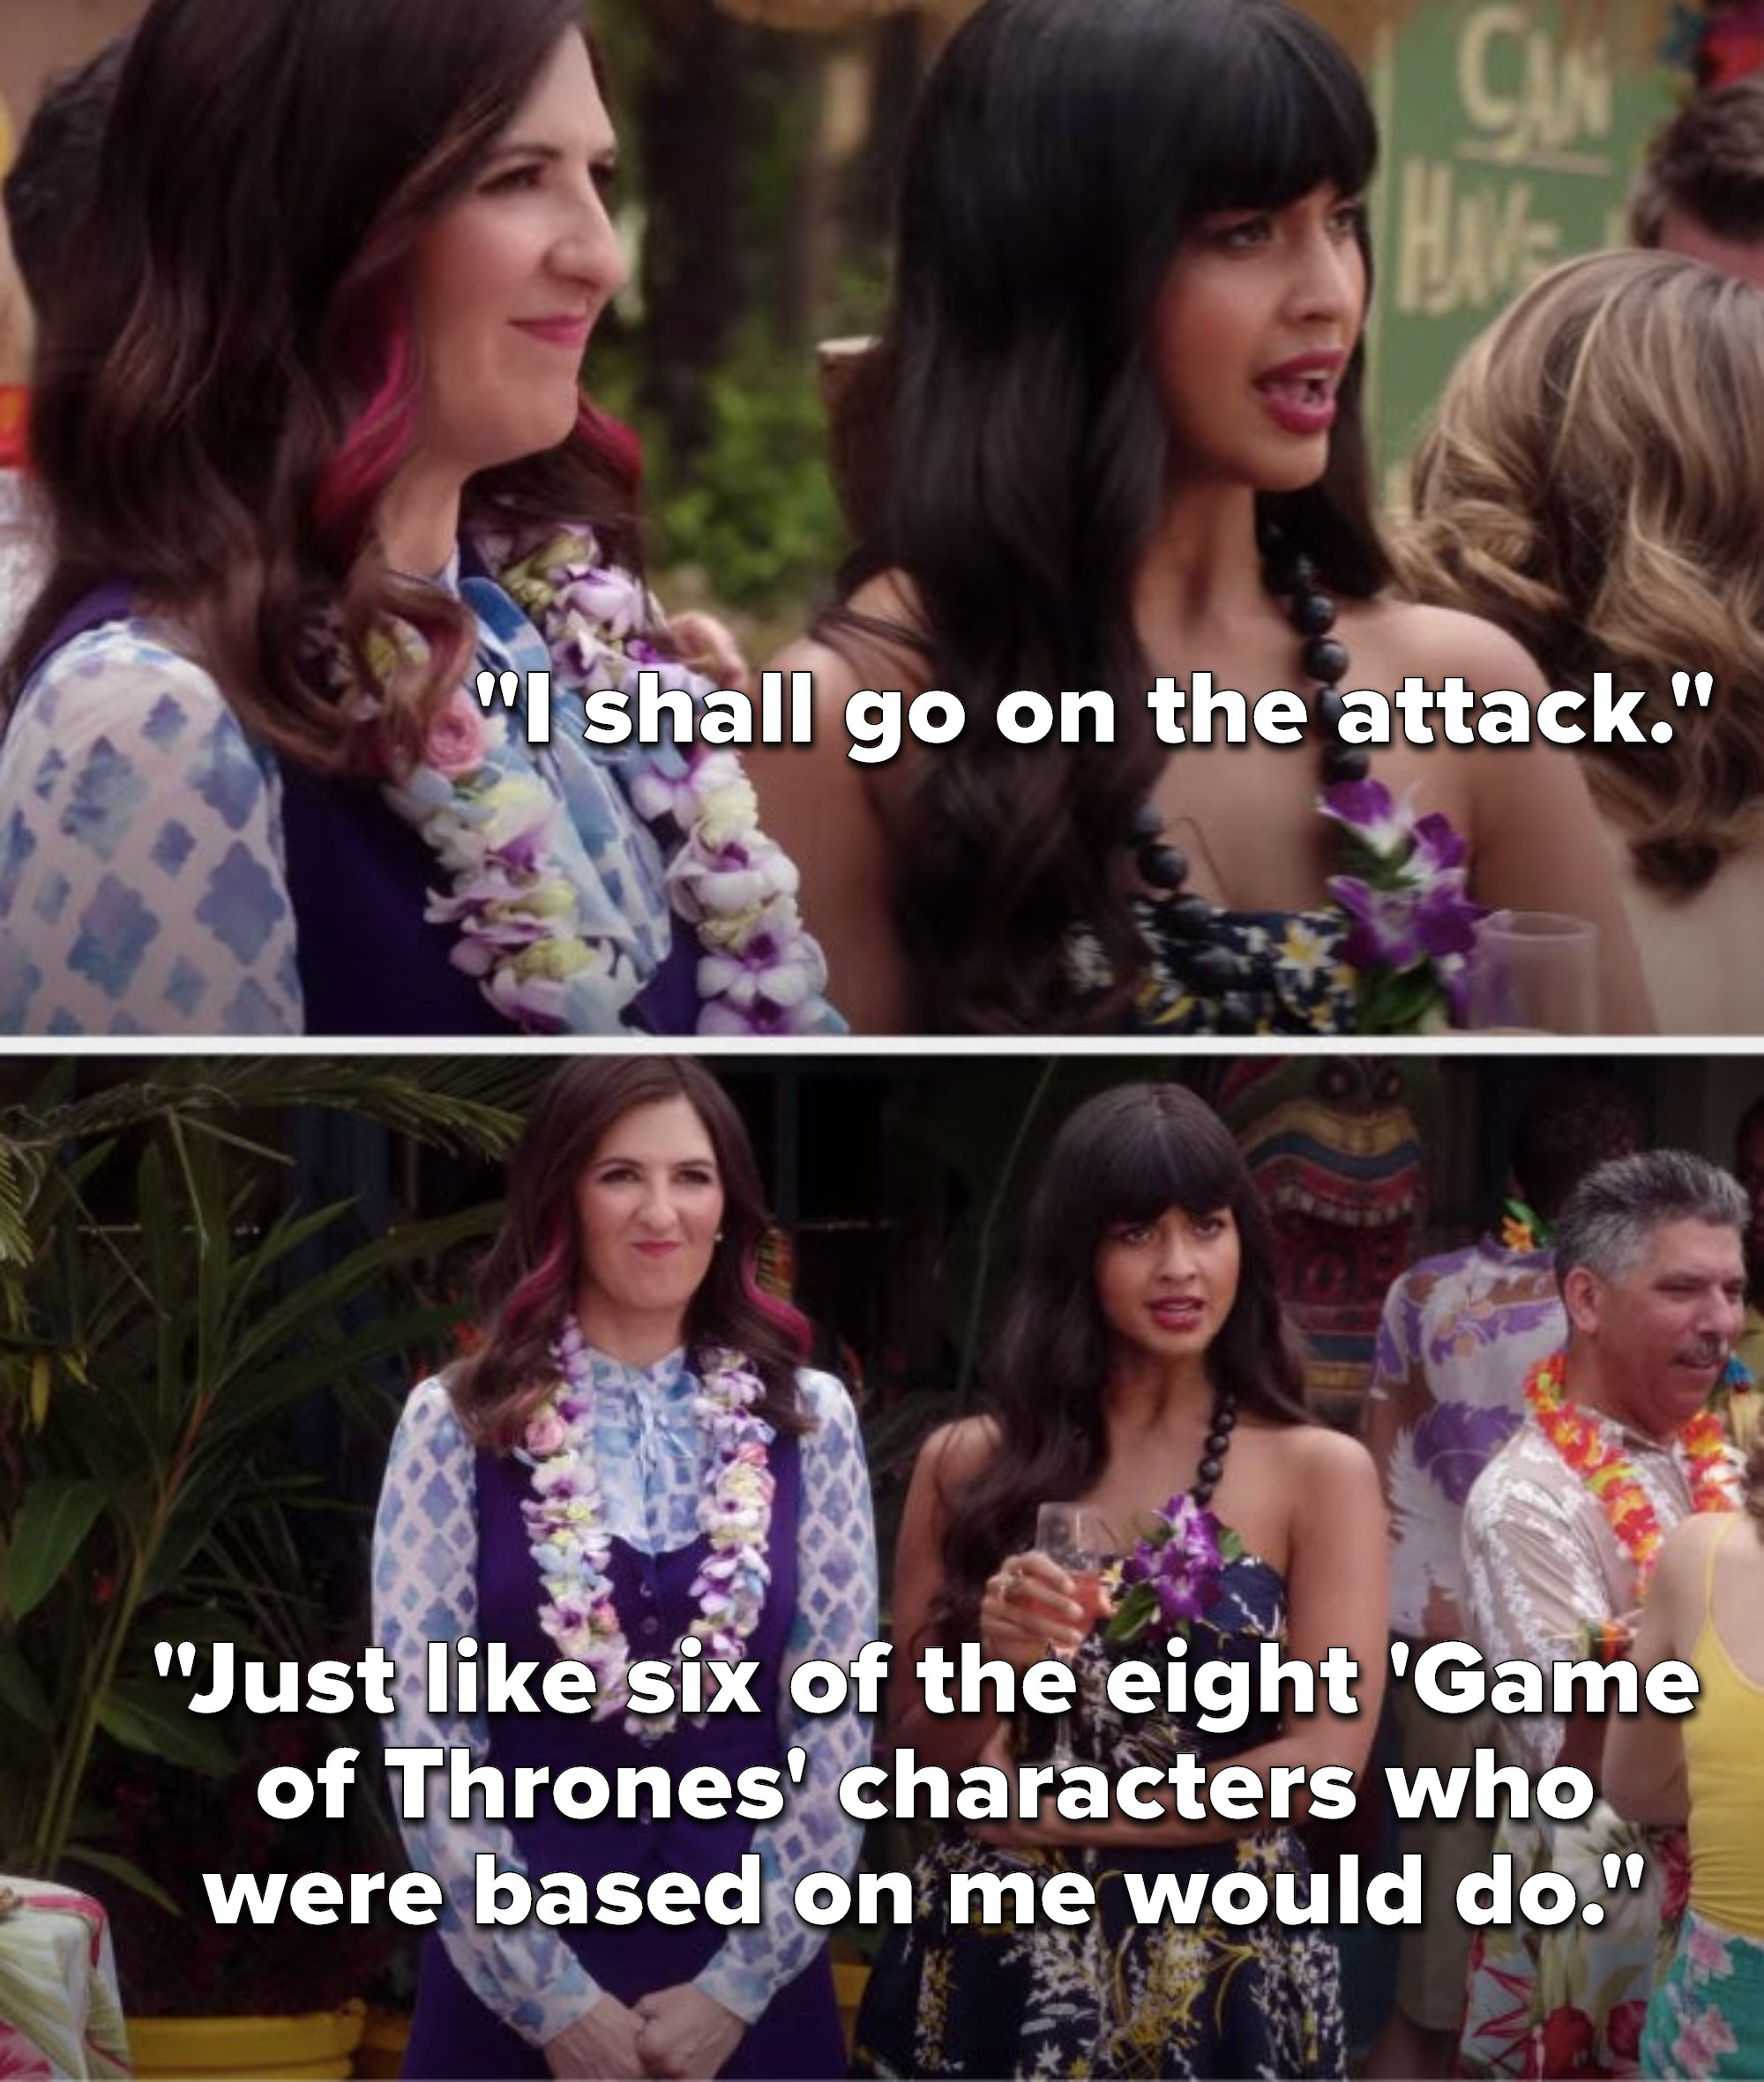 Tahani says, I shall go on the attack, just like six of the eight &#x27;Game of Thrones&#x27; characters who were based on me would do